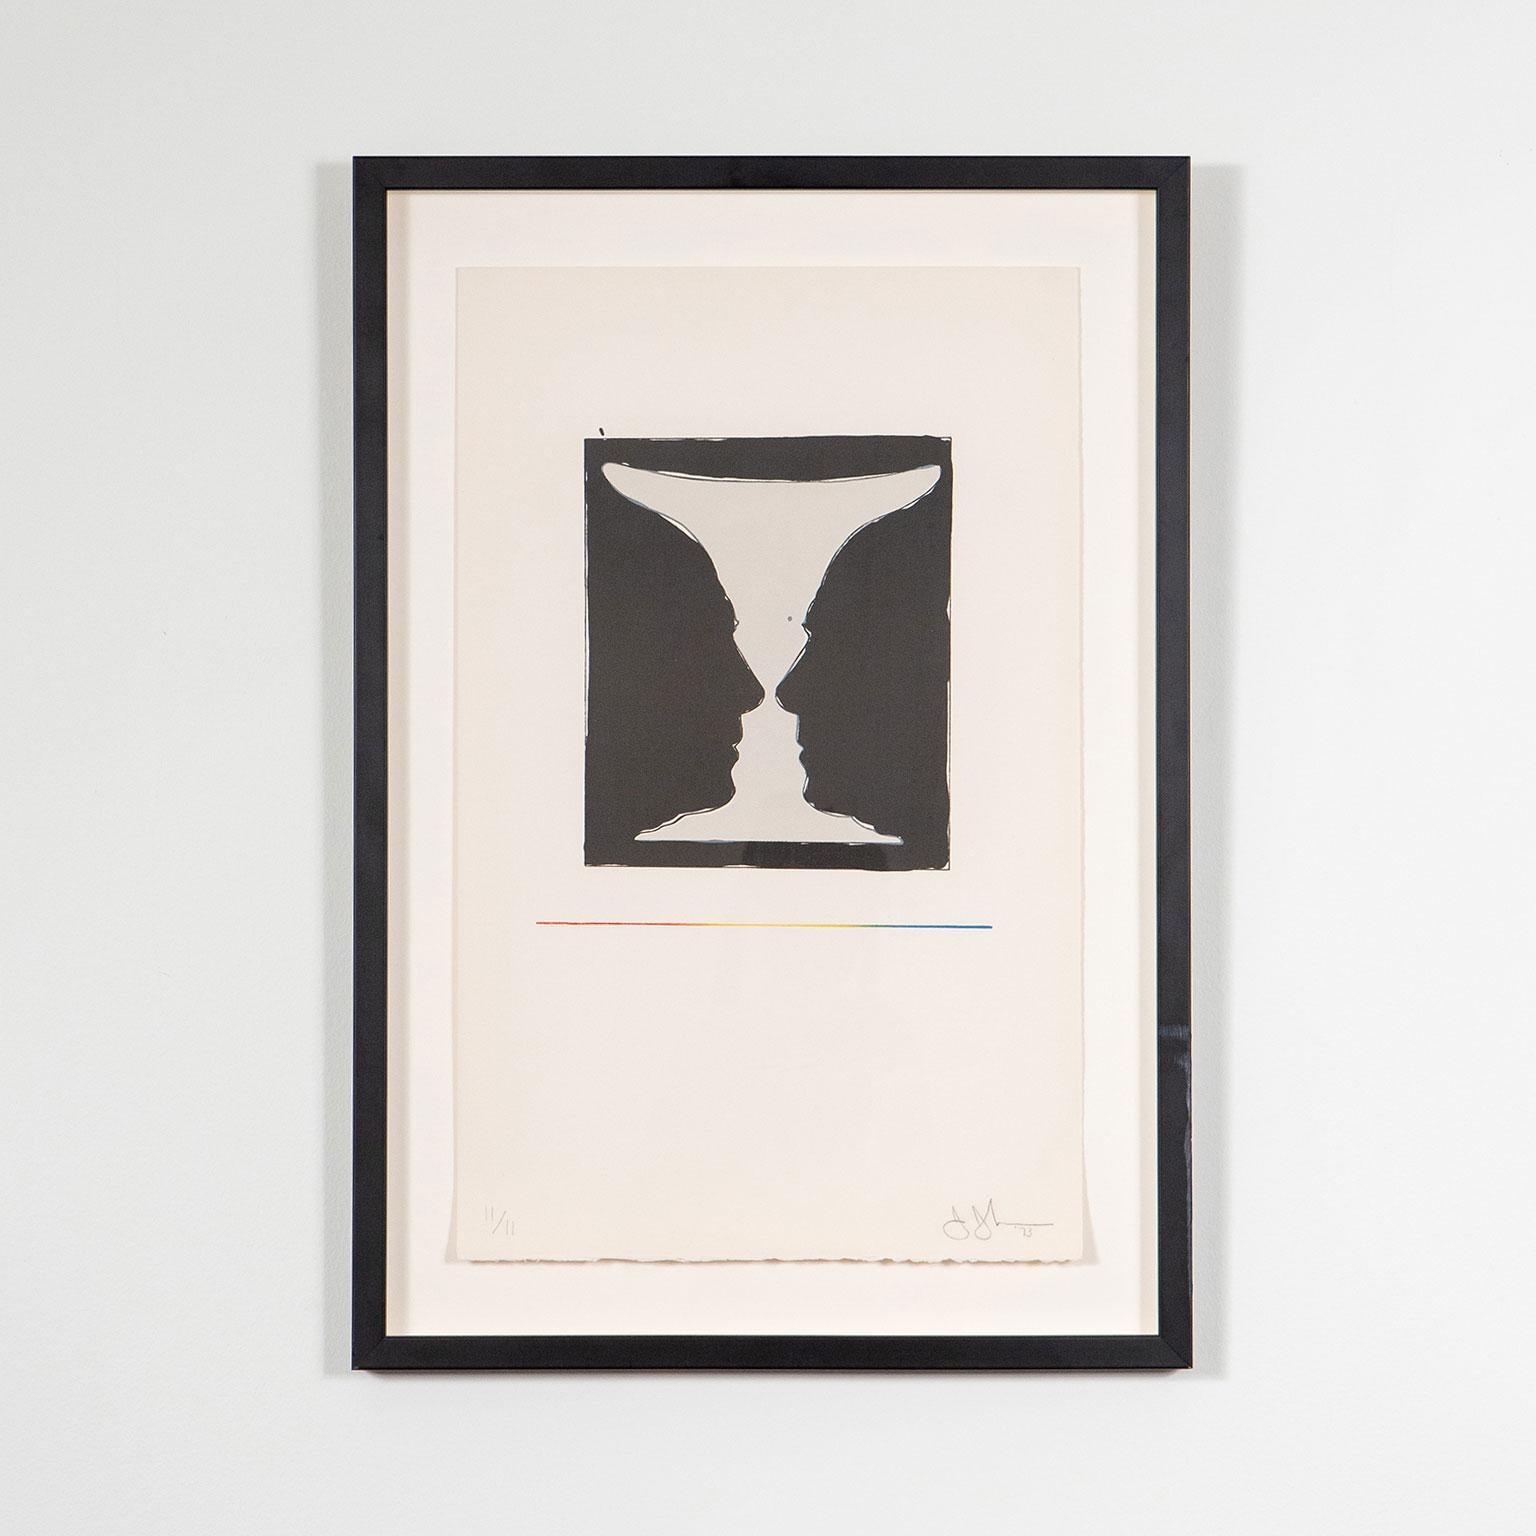 Cup 2 Picasso - Print by Jasper Johns